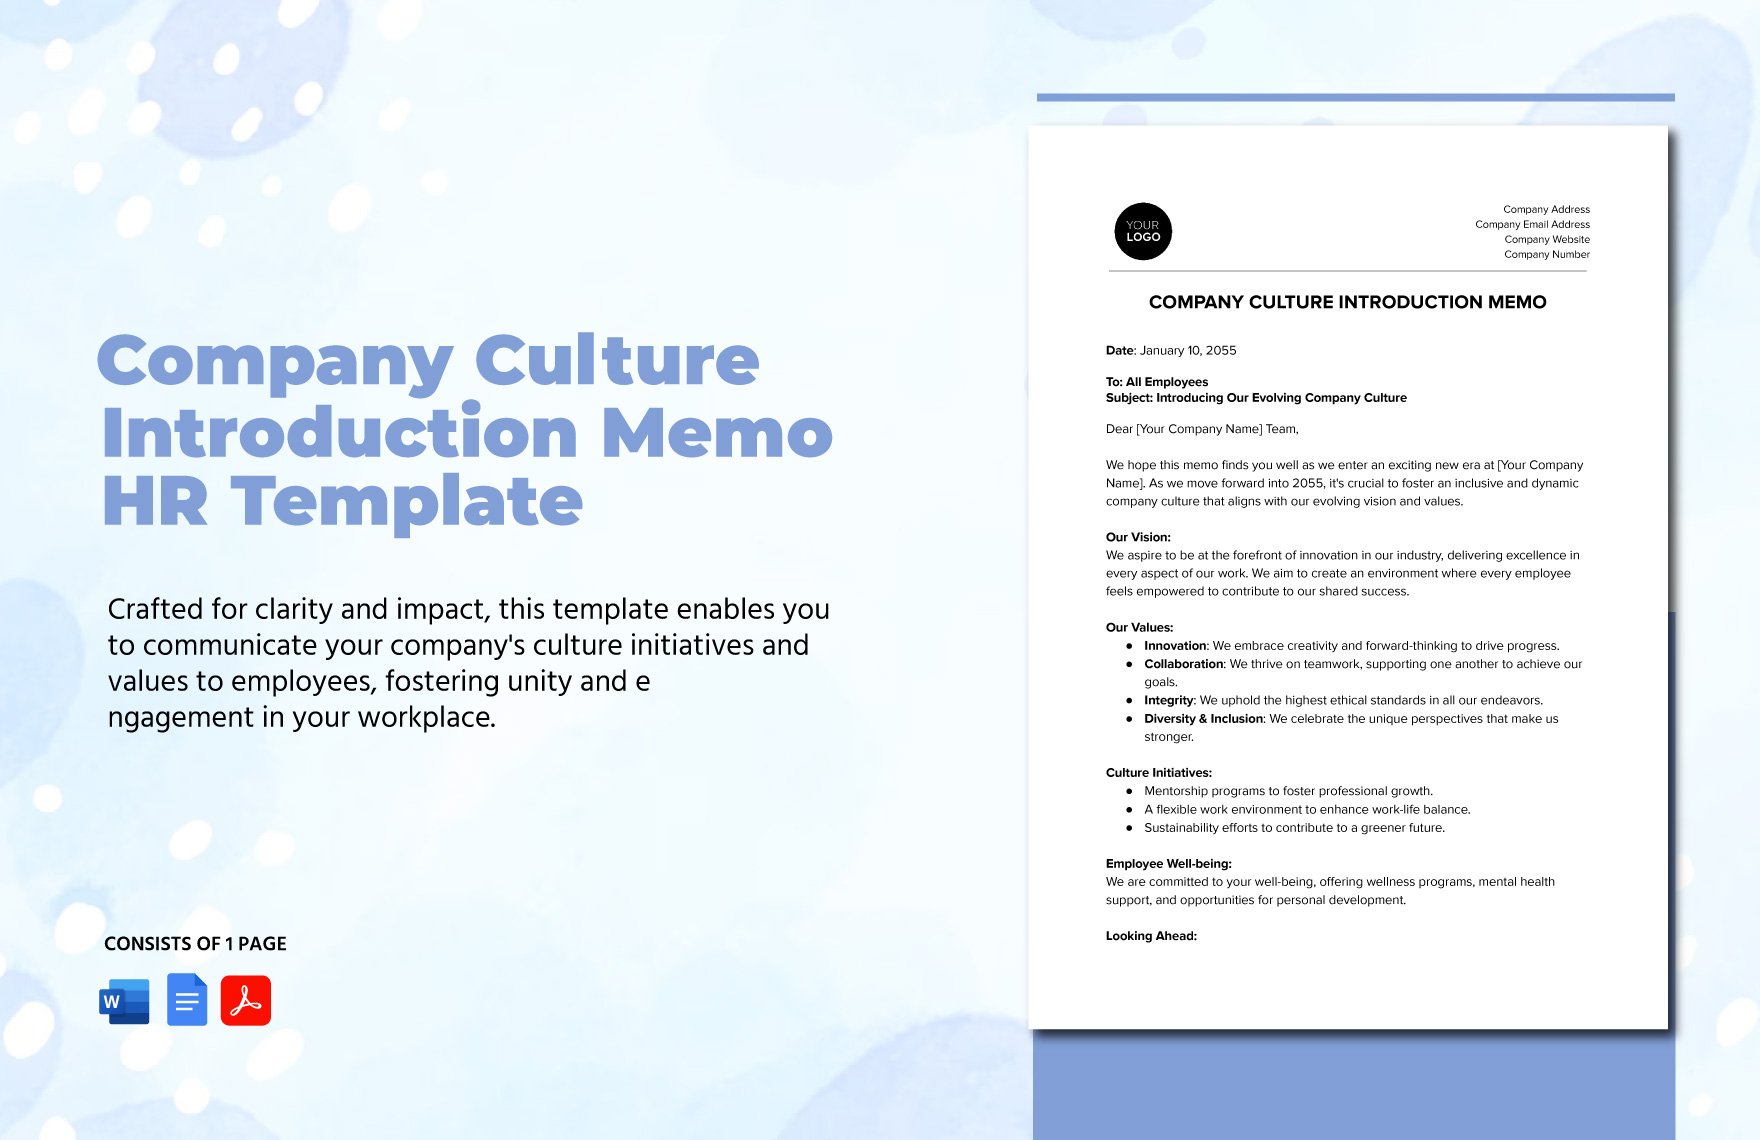 Company Culture Introduction Memo HR Template in Word, Google Docs, PDF